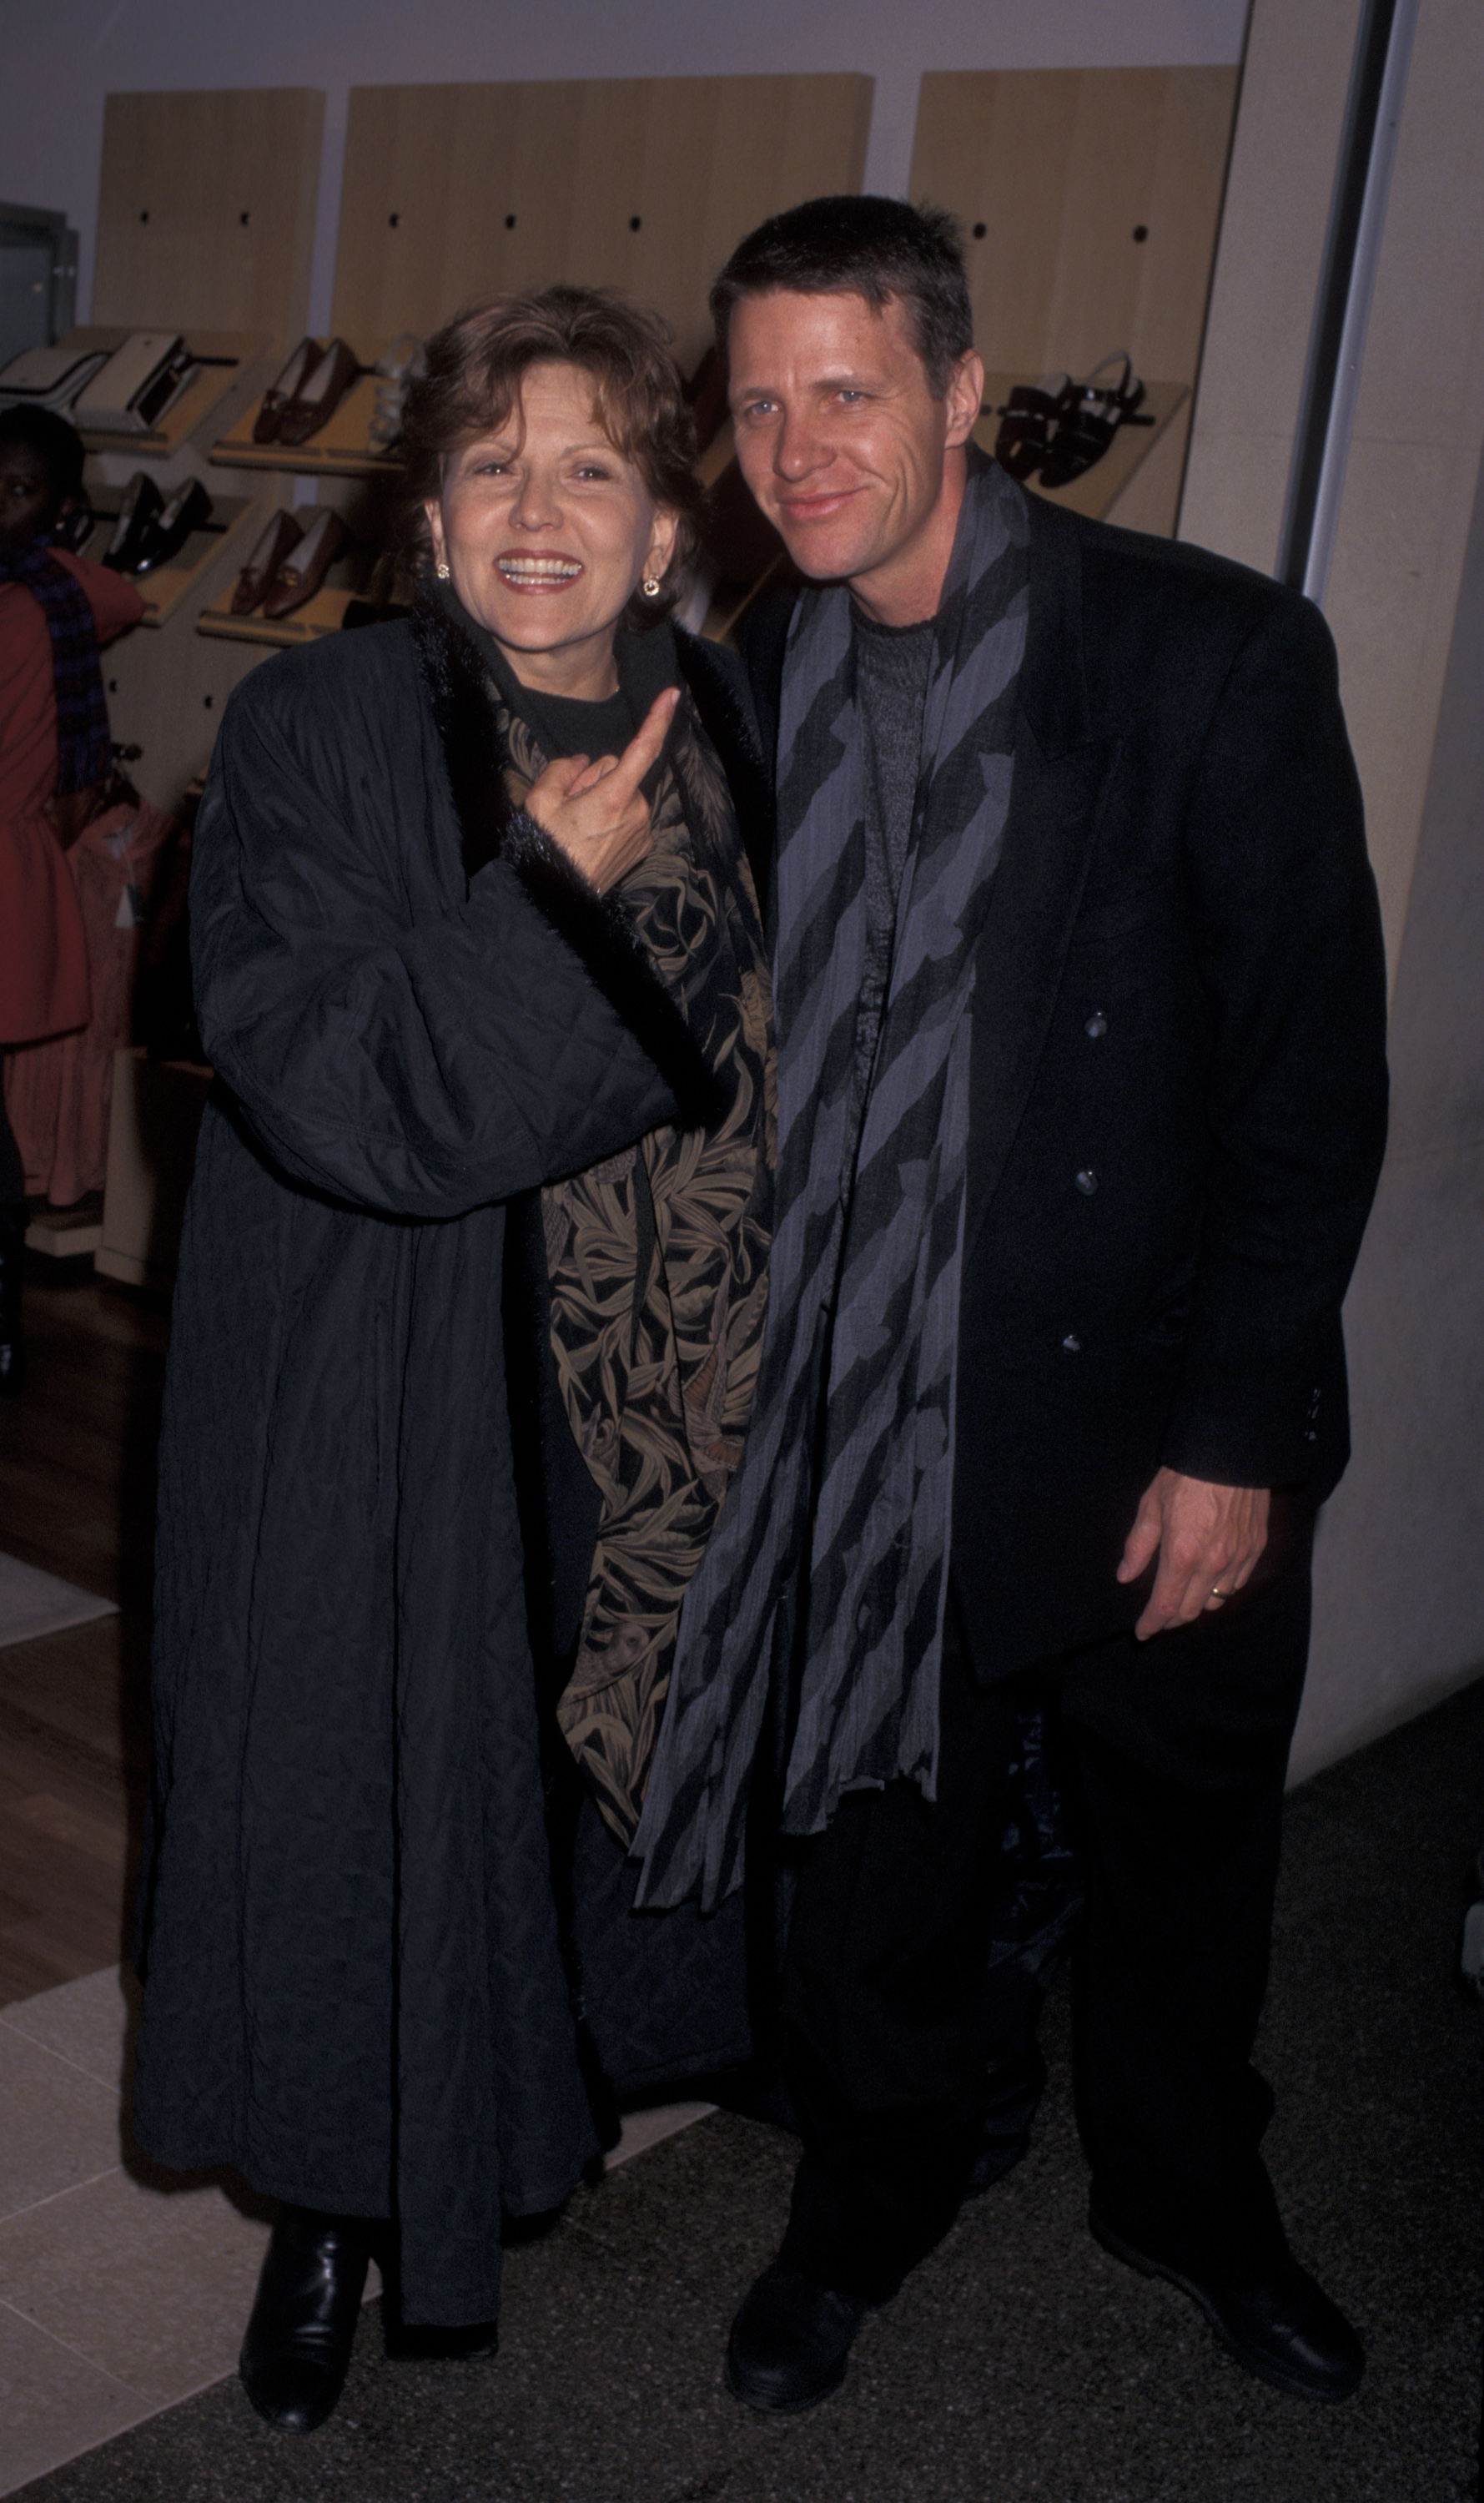 Brenda Vaccaro and her husband Guy Hector seen on December 22, 1996, at the Los Angeles International Airport in Los Angeles, California. | Source: Getty Images